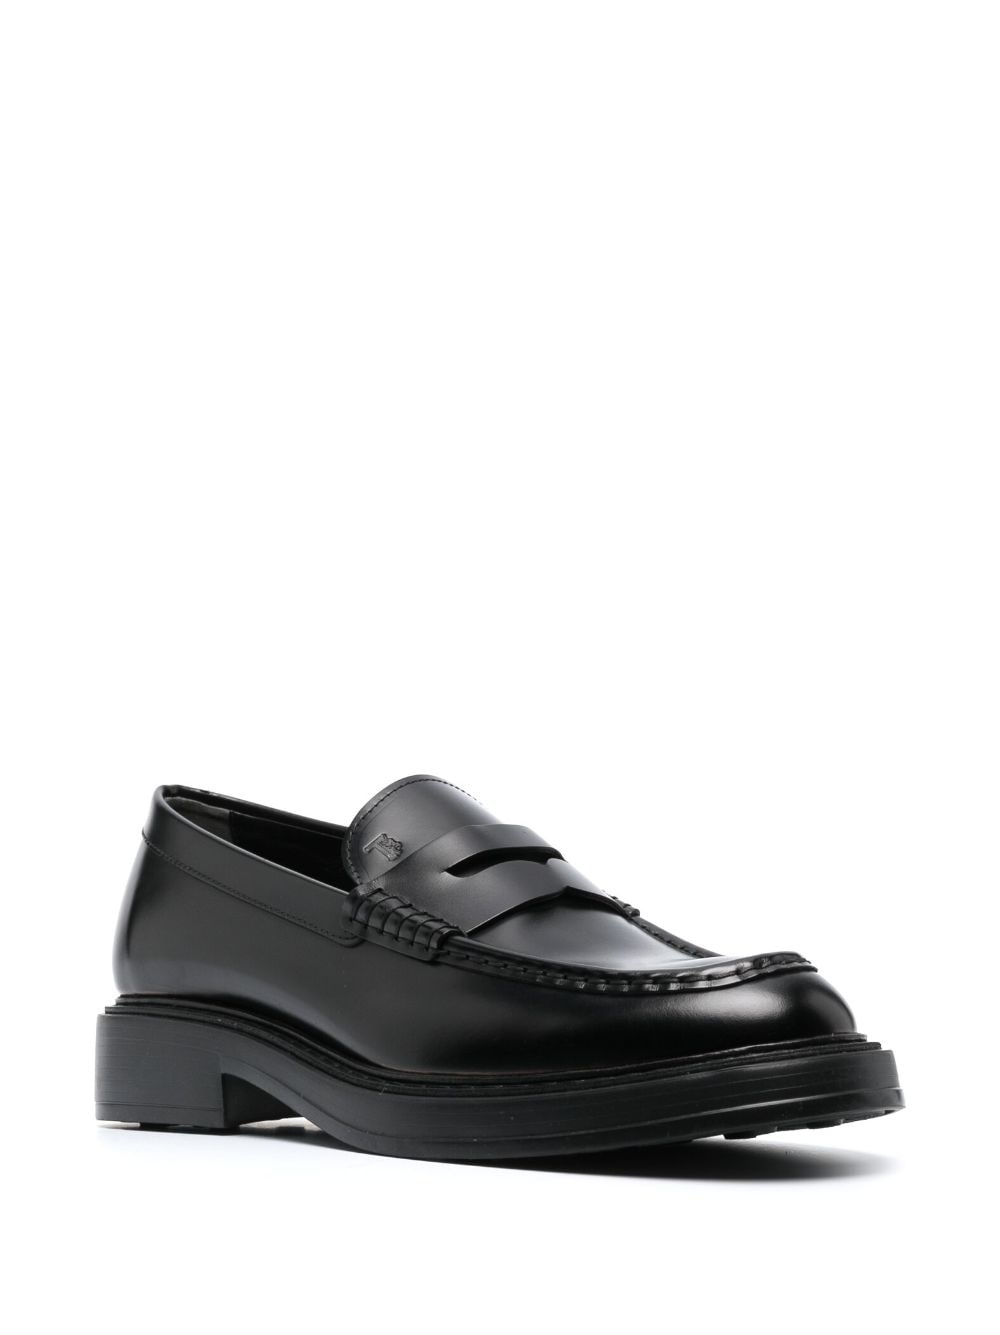 leather 50mm penny loafers - 2